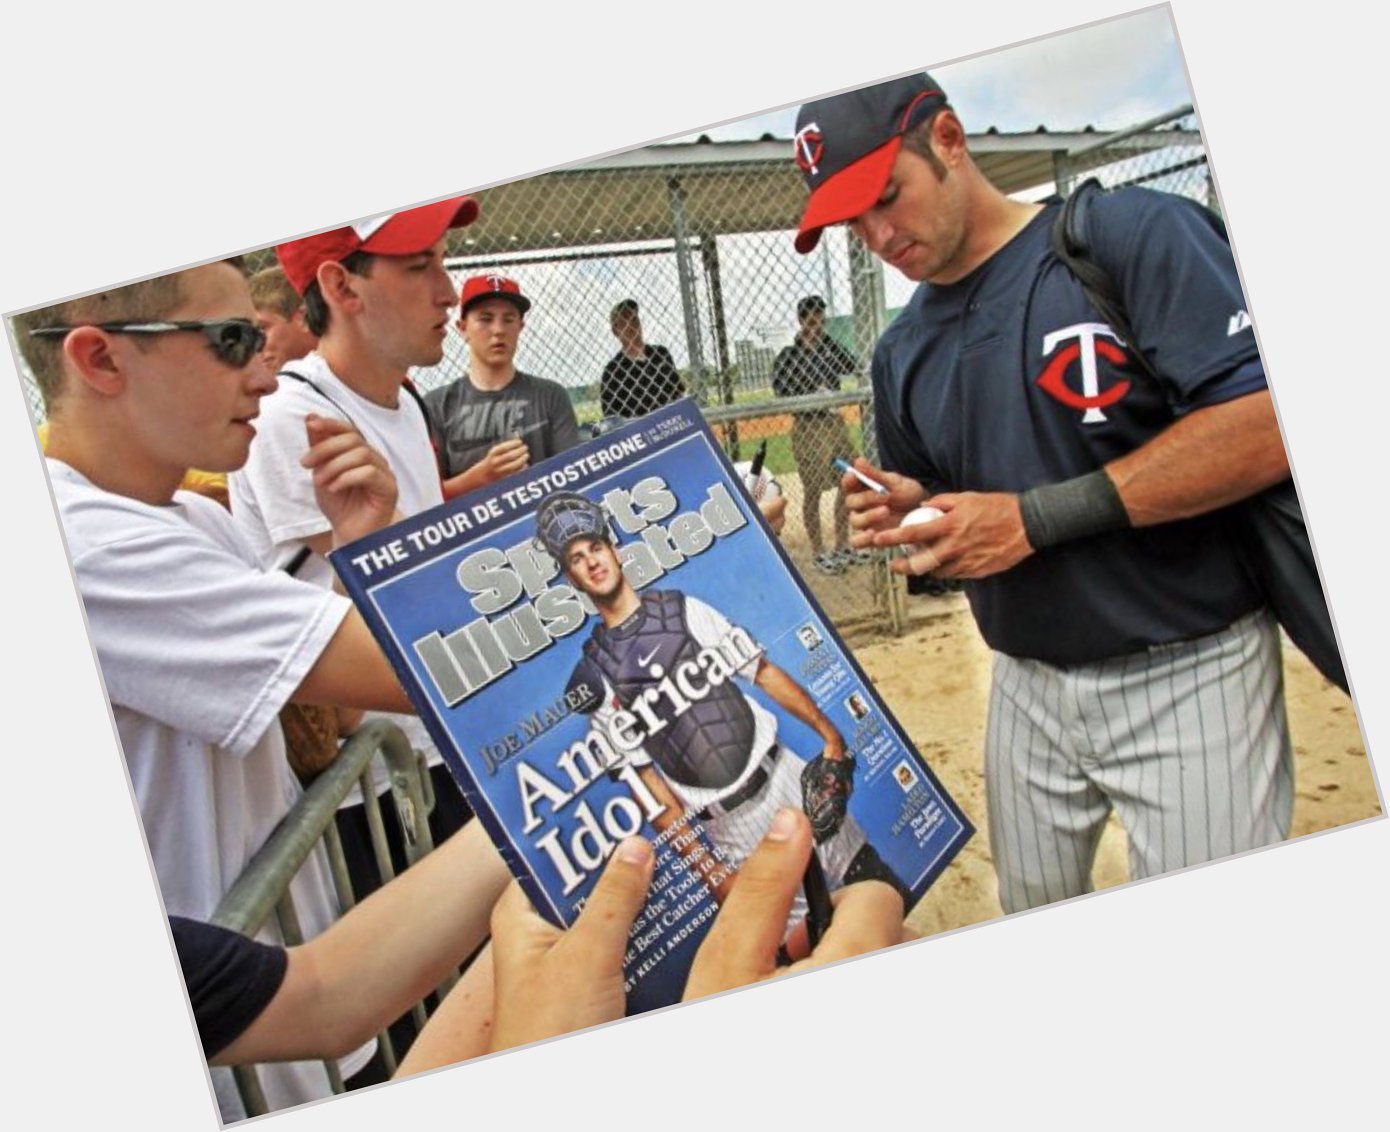 Happy Birthday, Joe Mauer! You re still my favorite Twin. From one twin to another 